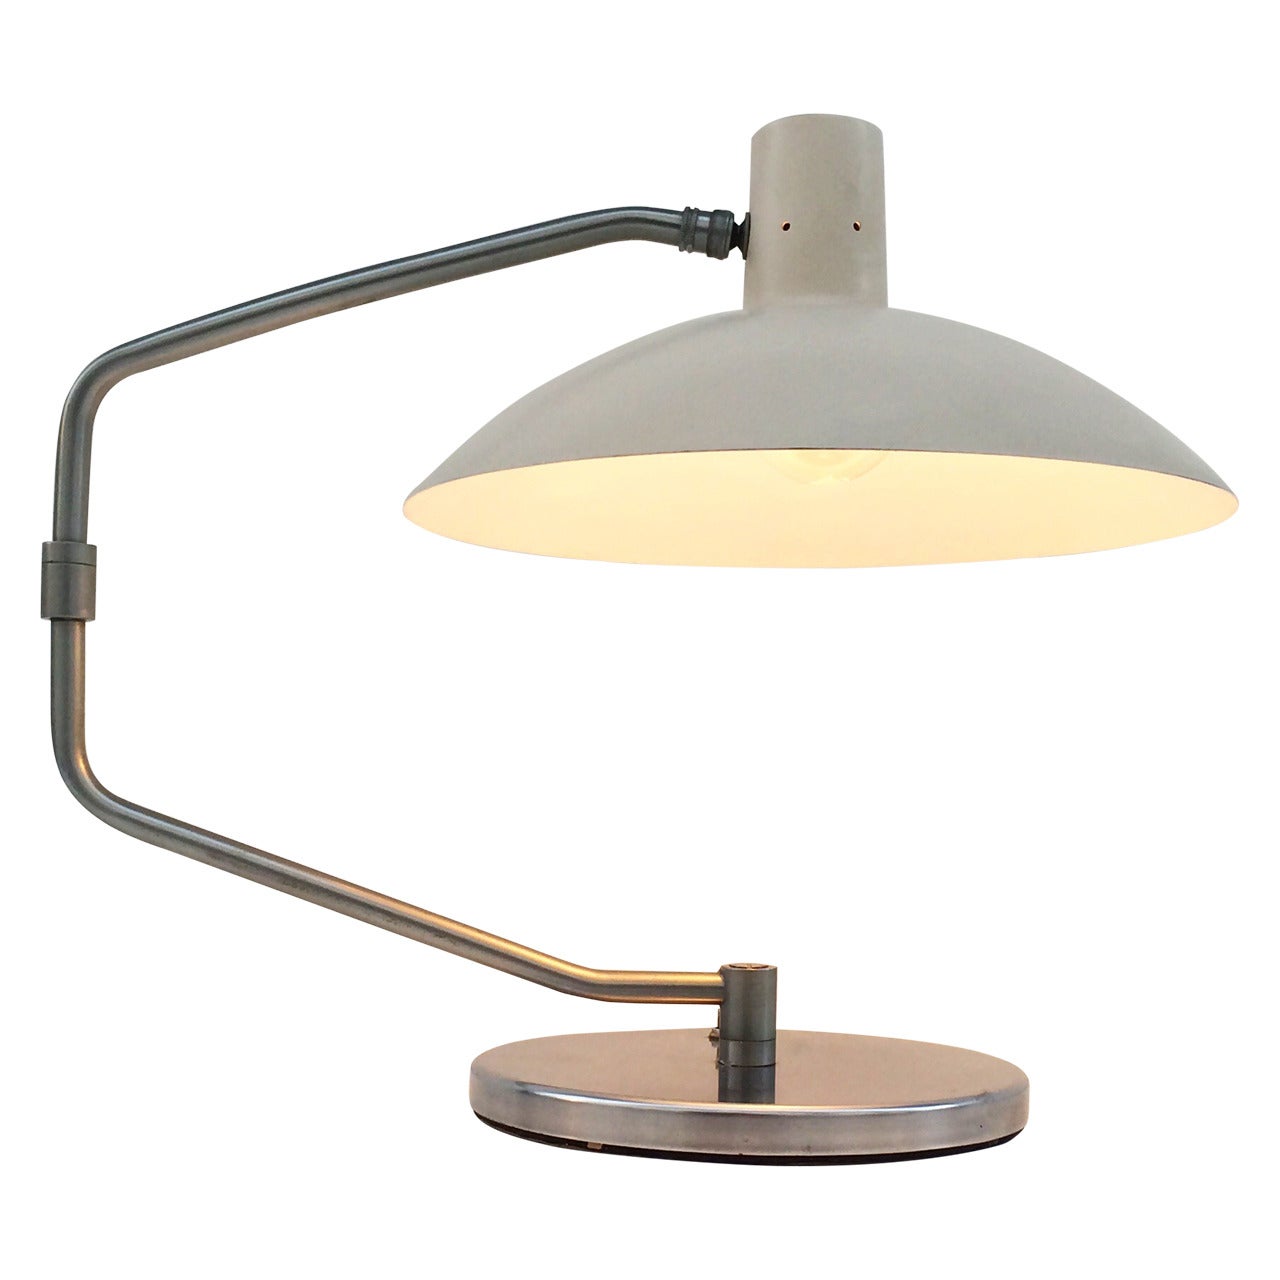 Clay Michie Adjustable Desk Lamp for Knoll